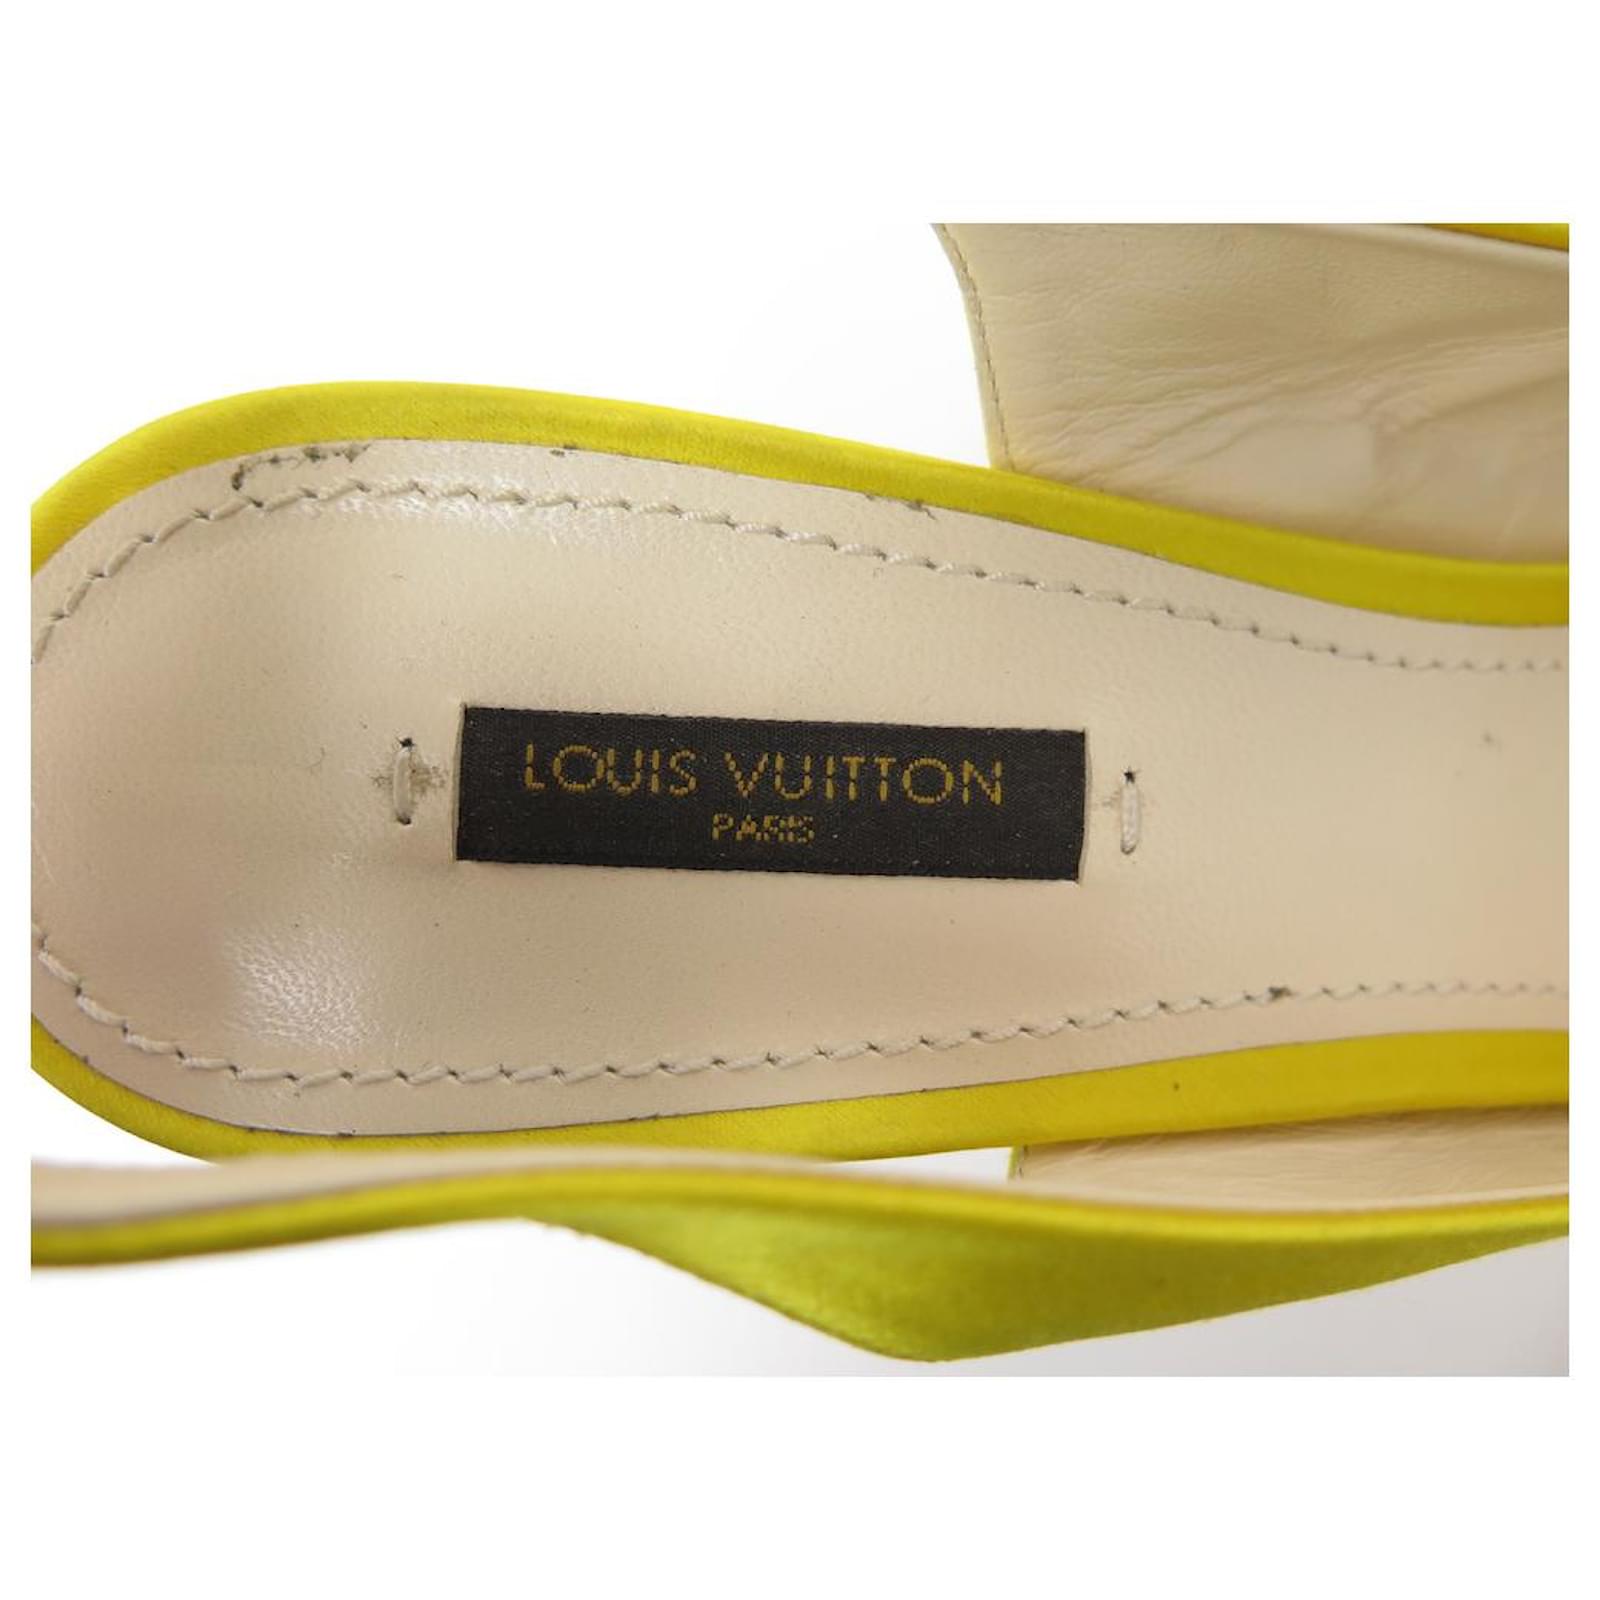 NEW LOUIS VUITTON BALL STRIPES CE SHOES5IPI1 38.5 PATENT LEATHER